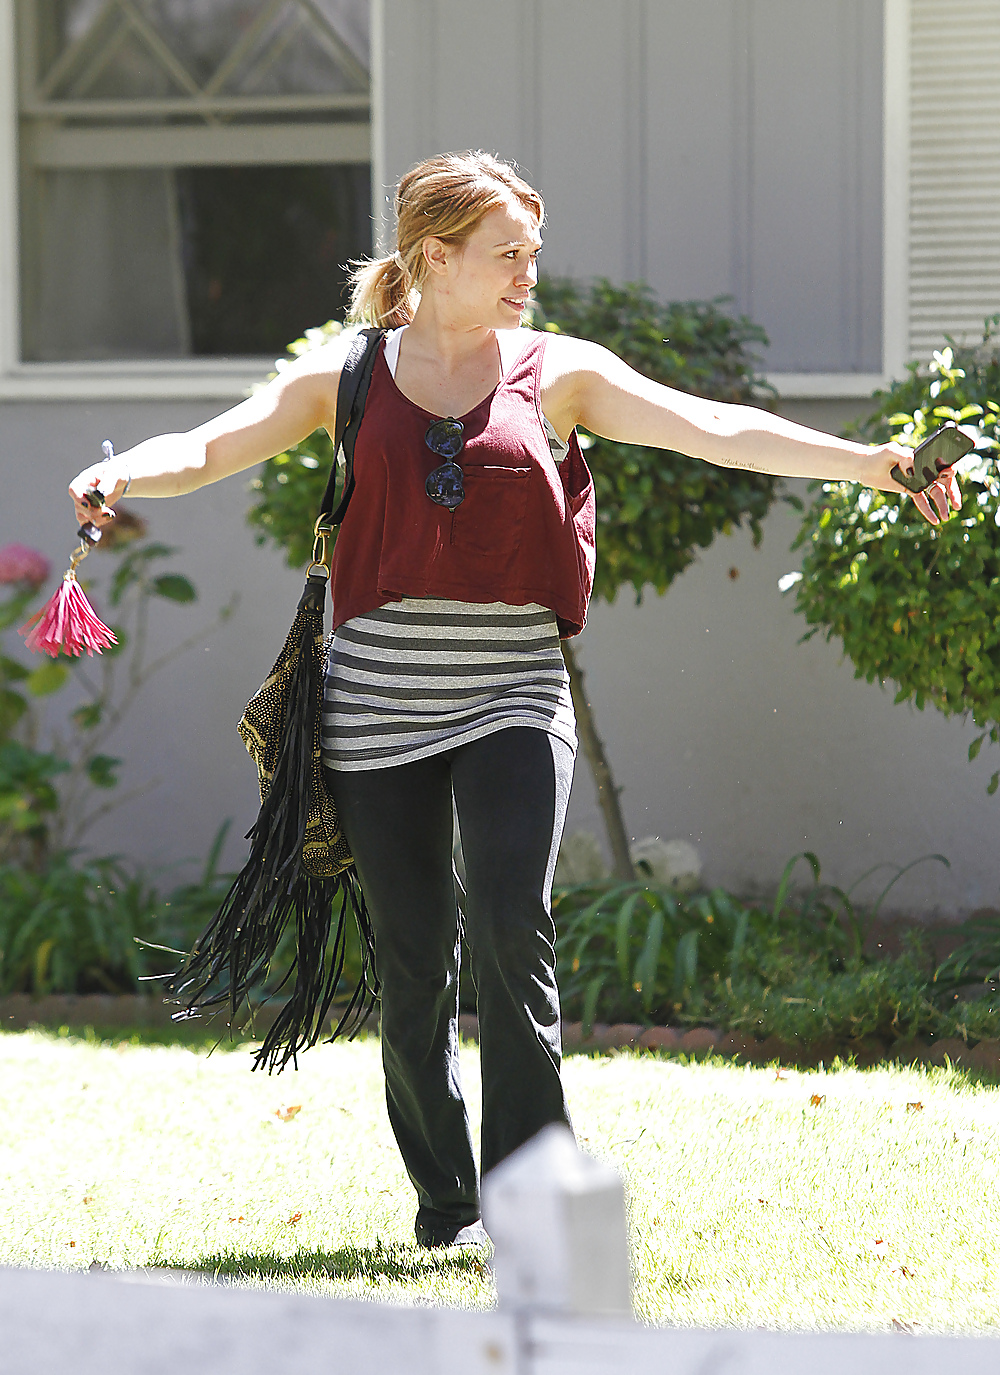 Hilary Duff Goes To Yoga Class Looking Happy Hollywood #7464040